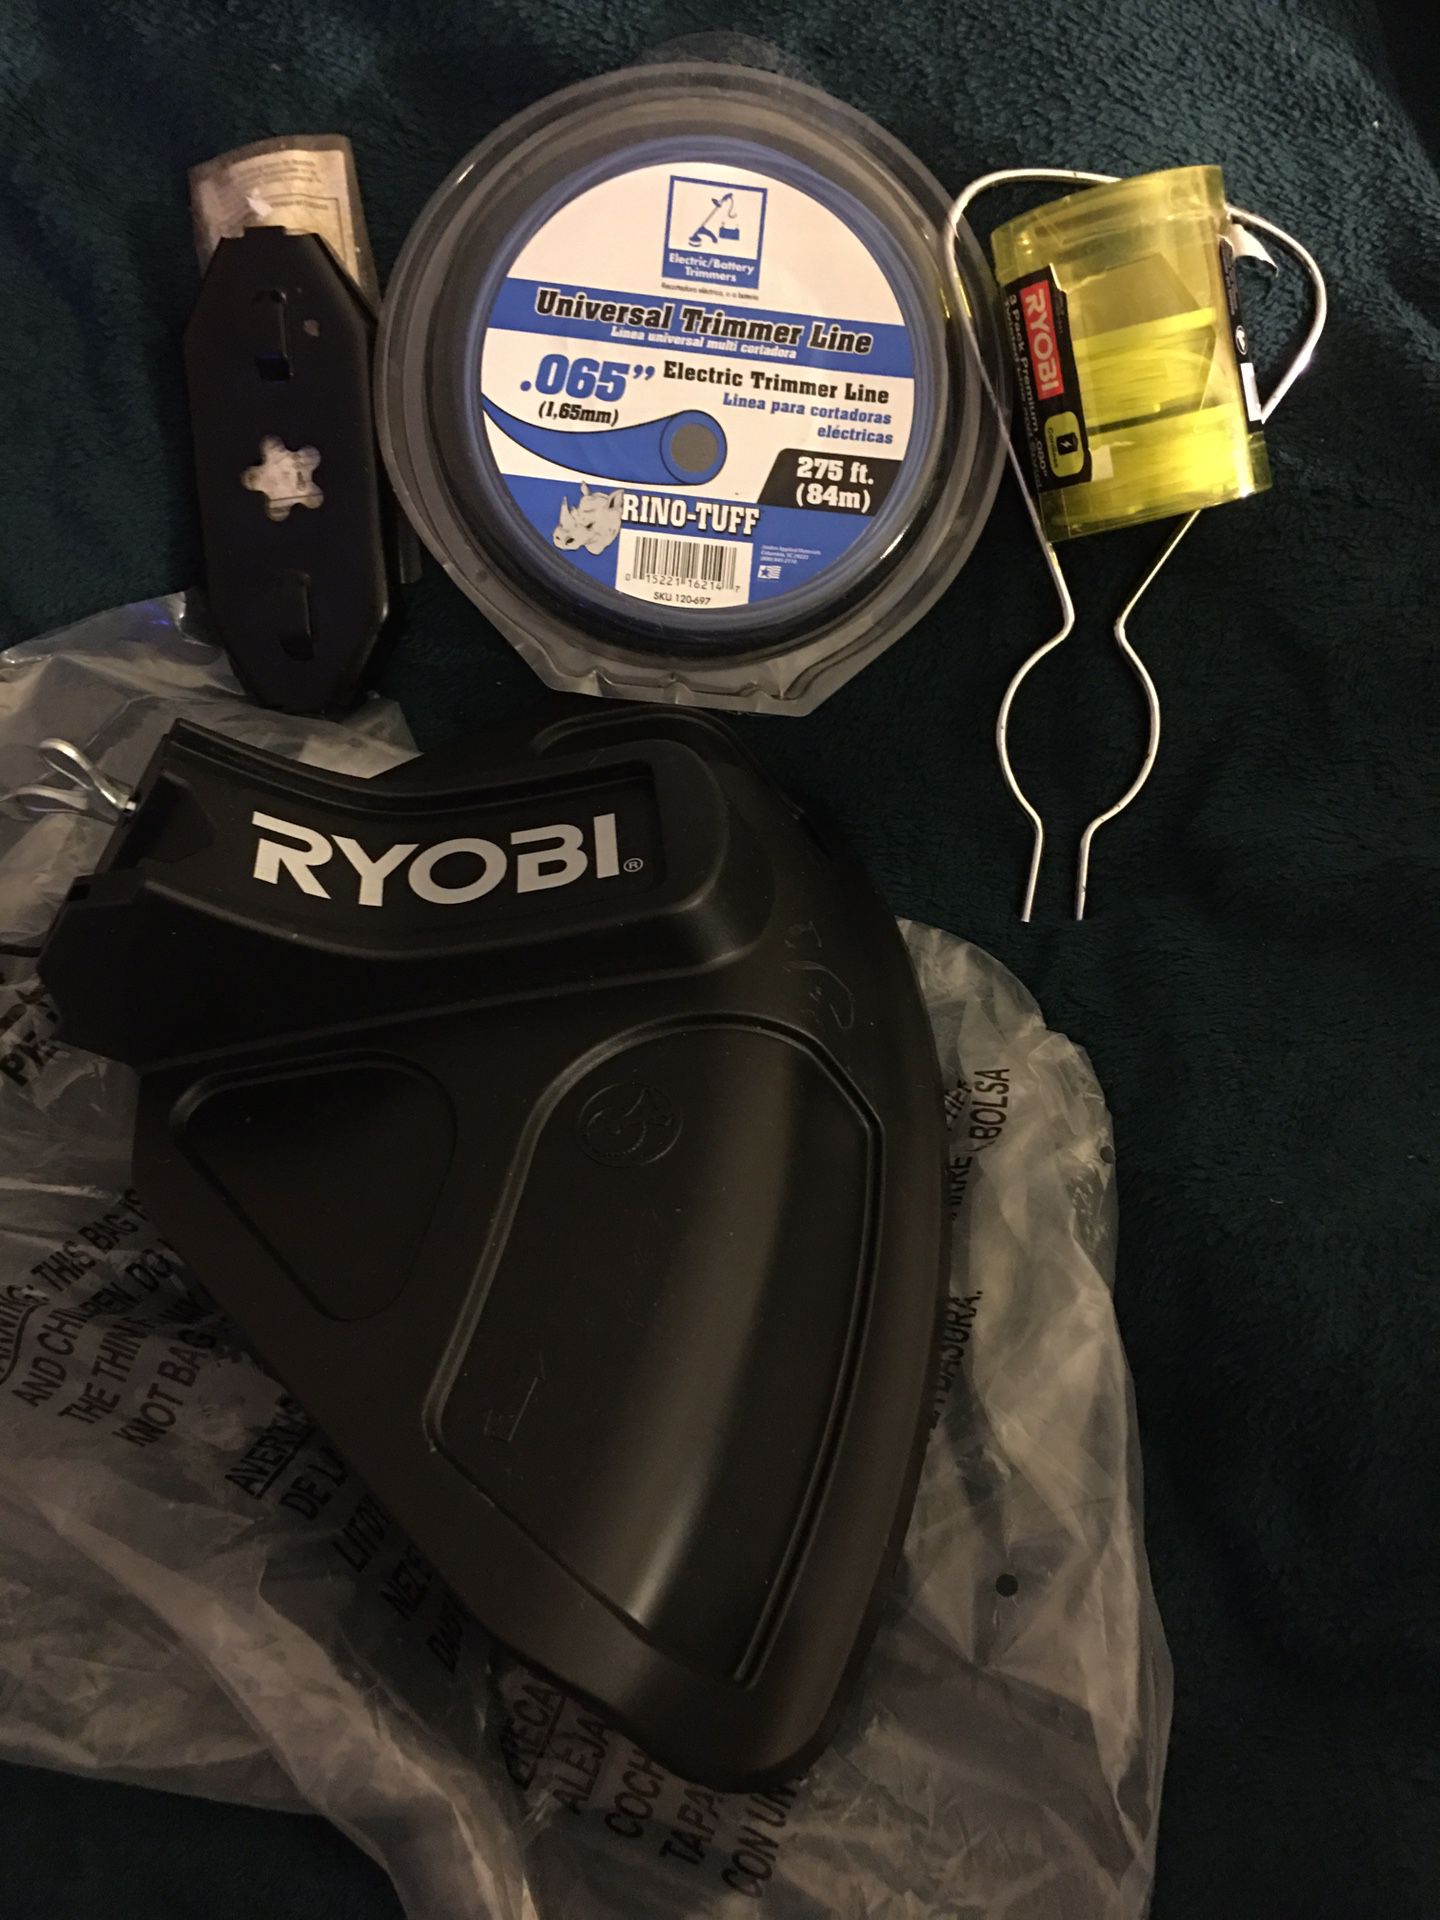 BRAND NEW RYOBI 40VOLT TRIMMER HEAD GUARD SHIELD WITH TRIMMER LINE AND TOOLS FOR TRIMMER HEAD $20.00